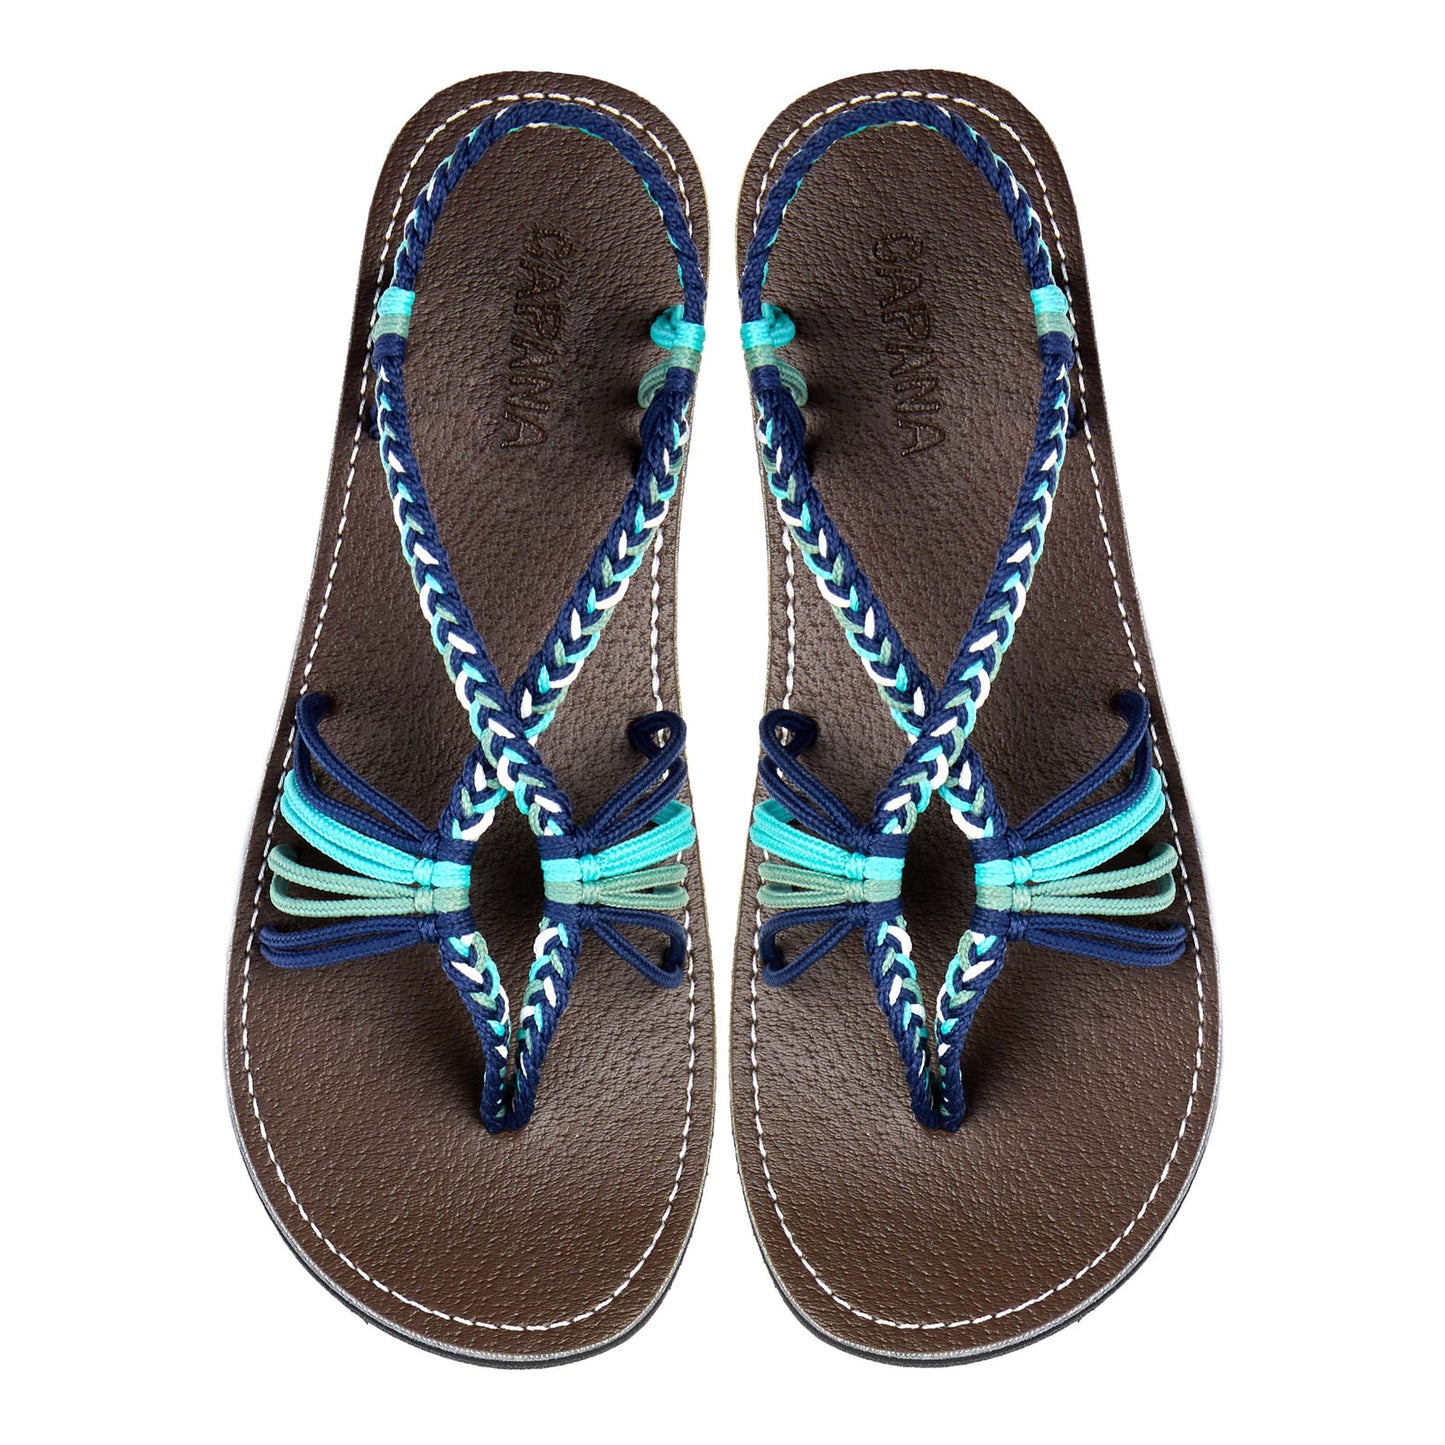 Cocoon Marine Pistachio Rope Sandals Blue Green thong design Flat sandals for women